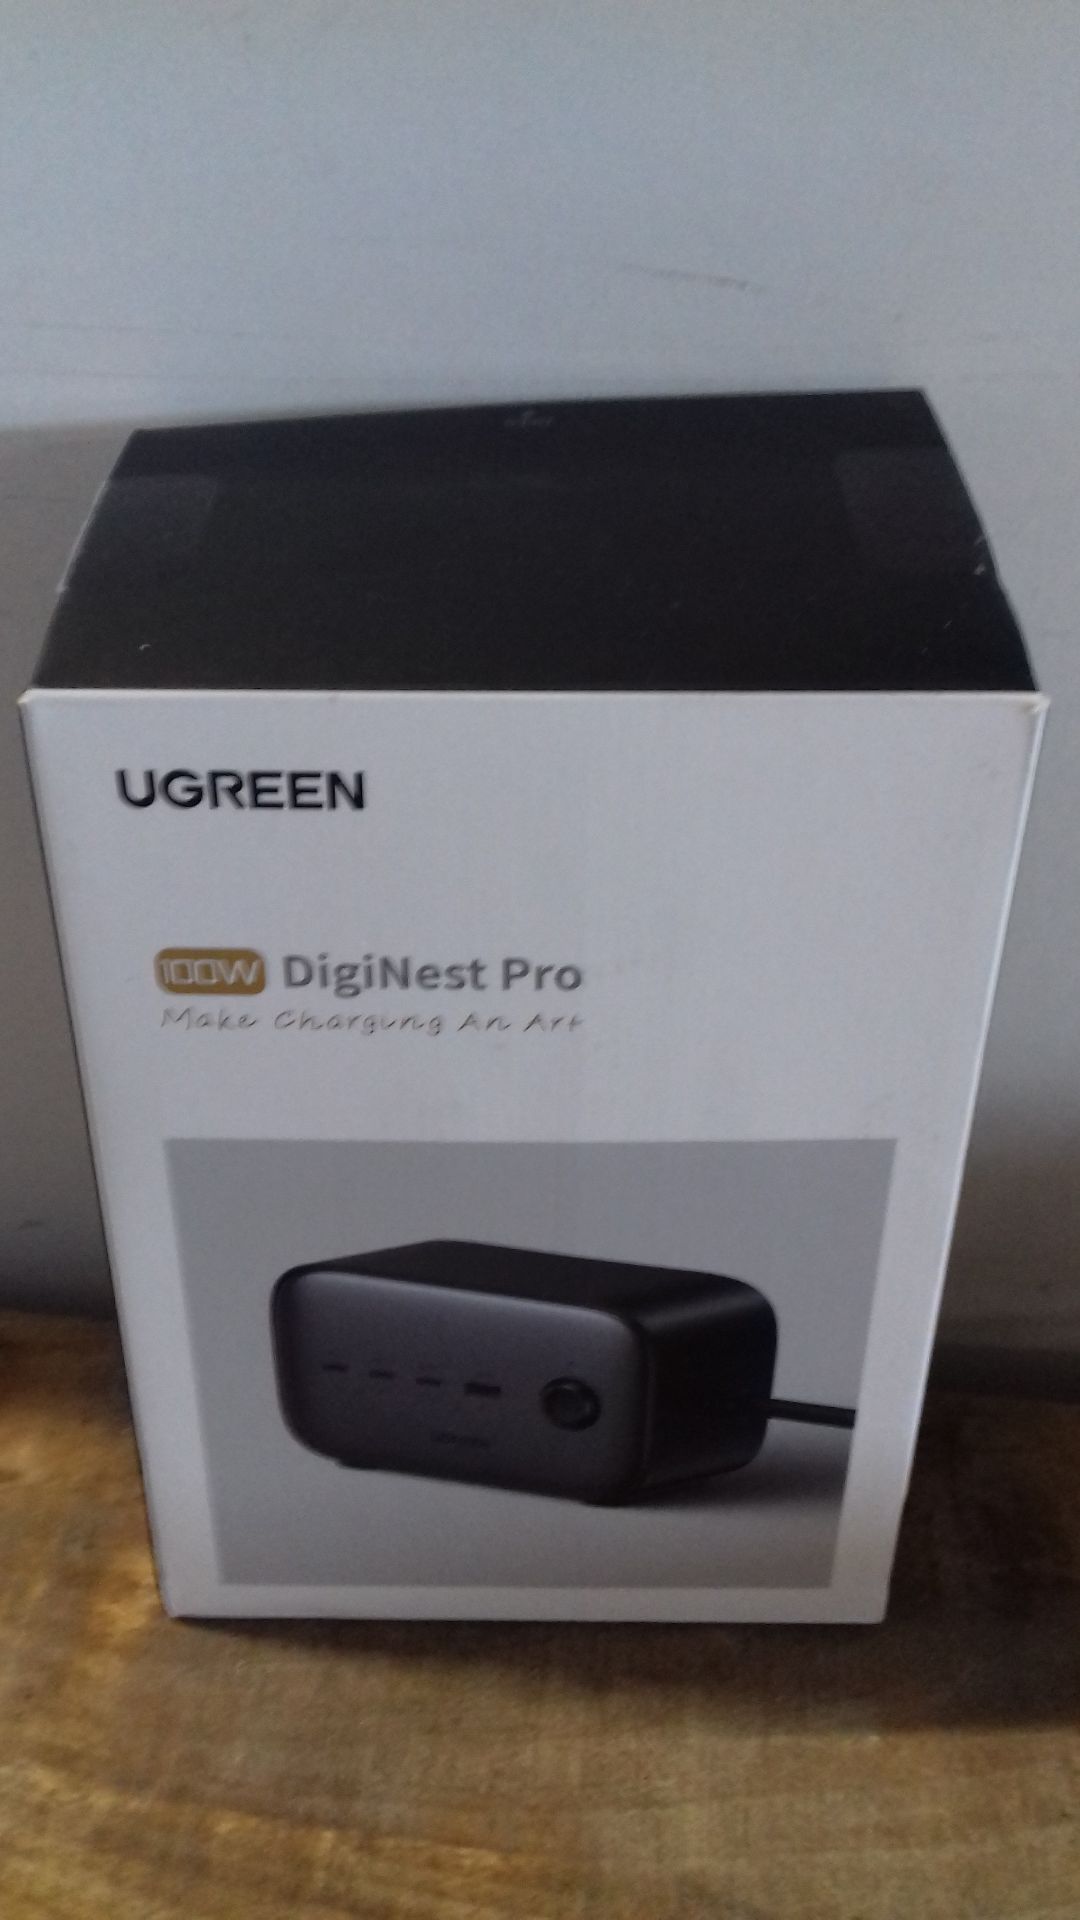 RRP £109.99 UGREEN 100W DigiNest Pro - Image 2 of 2